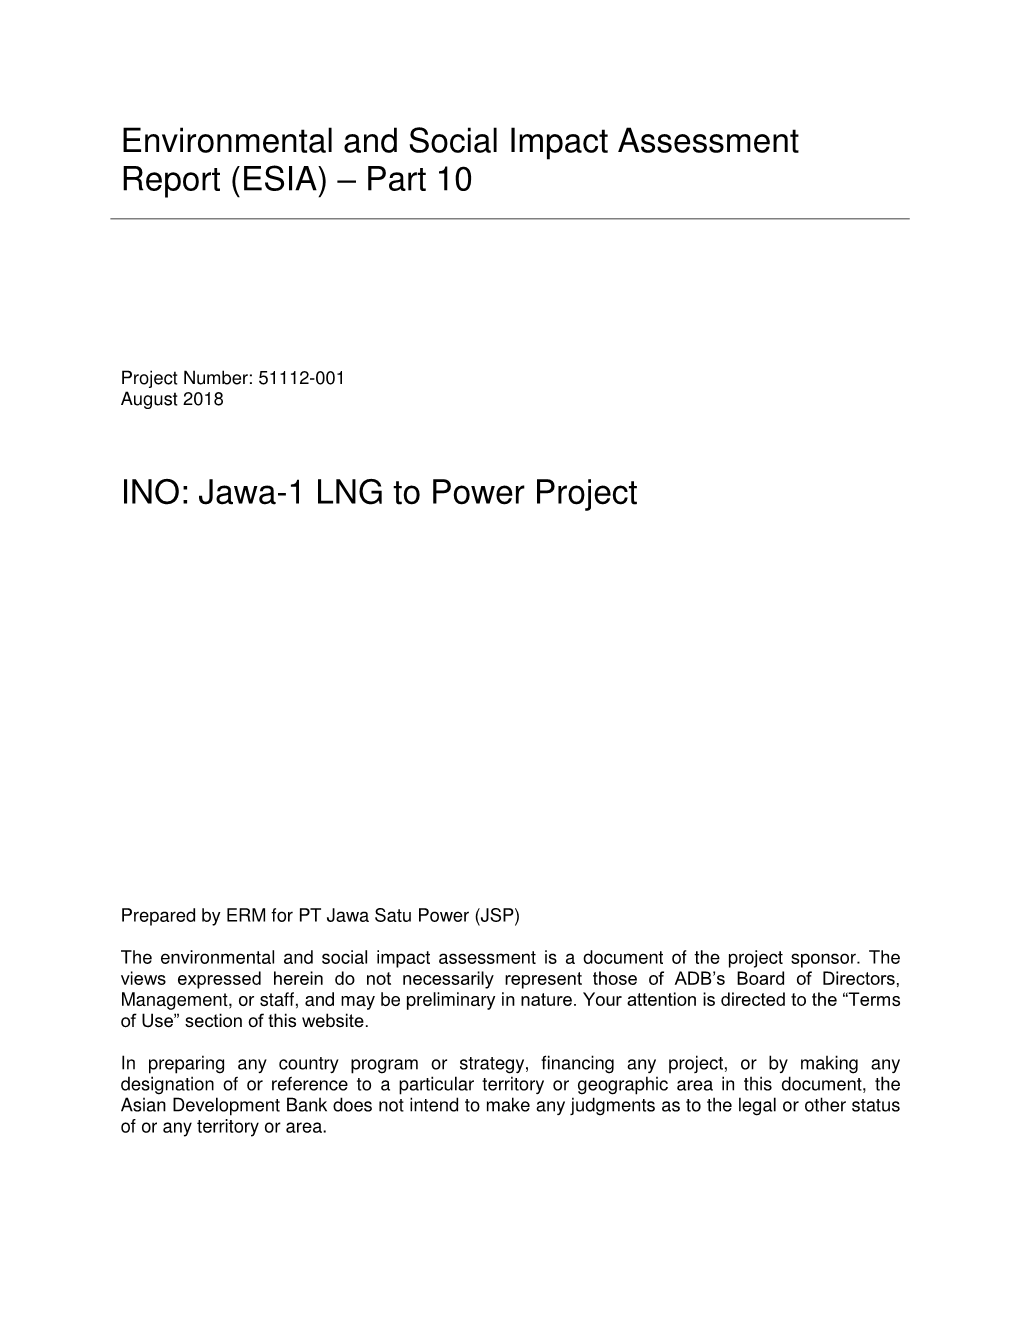 51112-001: Jawa-1 Liquefied Natural Gas-To-Power Project